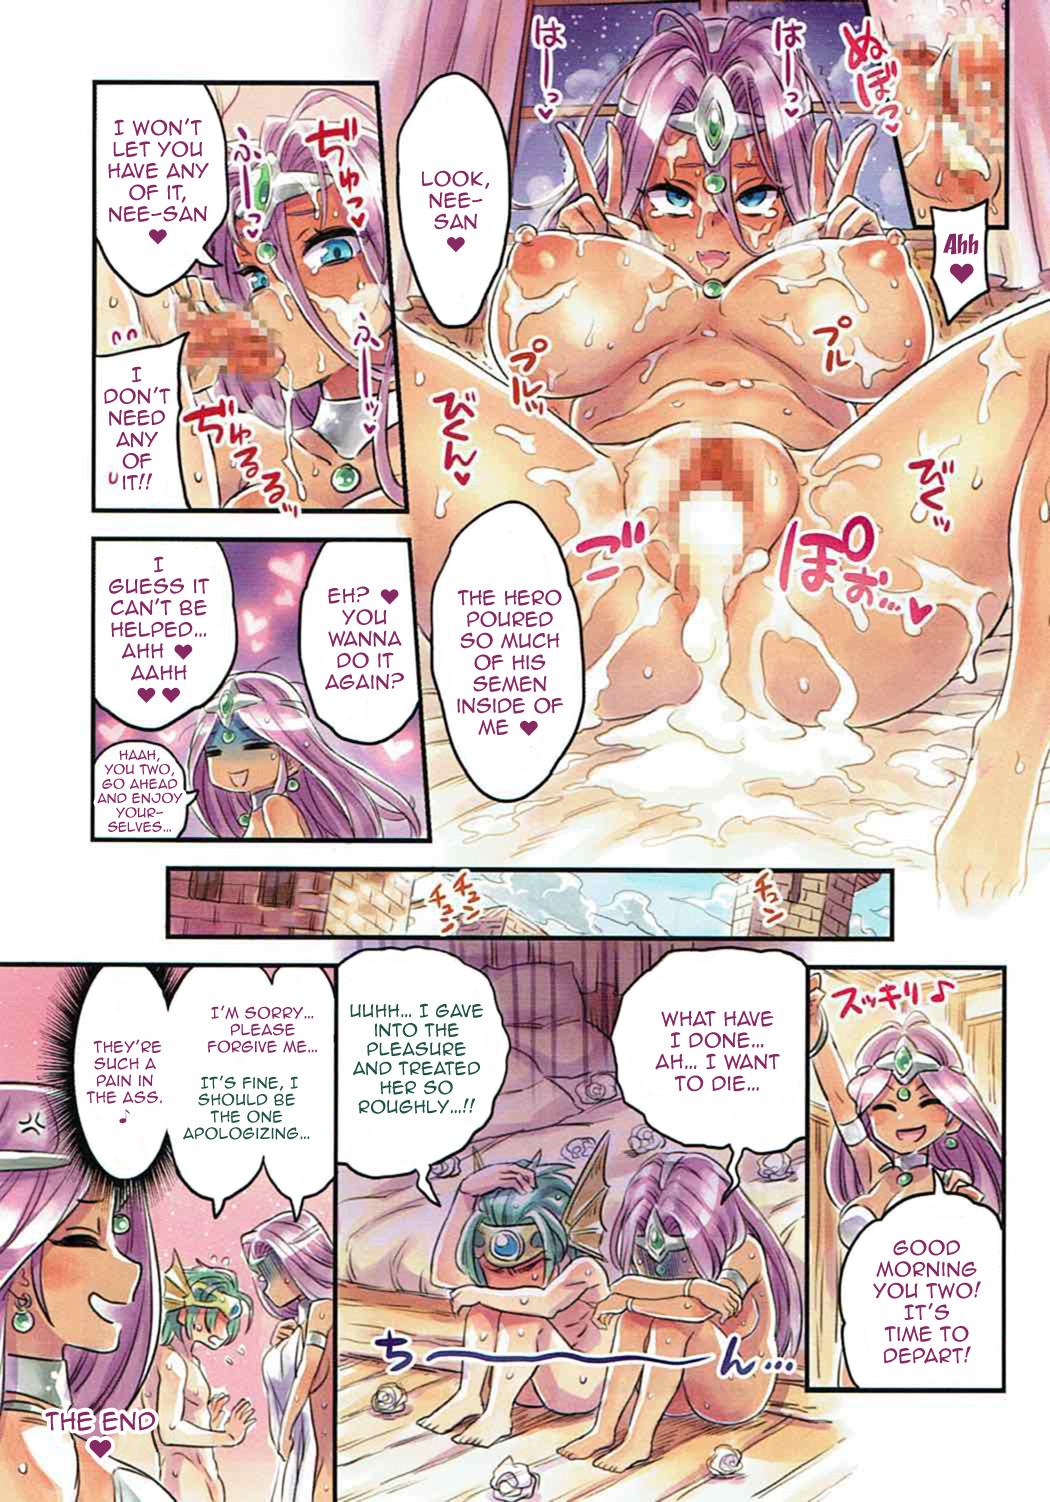 (C89) [Mimoneland (Mimonel)] Nakama to Issen Koechau Hon ~DQ Hen~ | A Book About Crossing The Line With Companions ~DQ Edition~ (Dragon Quest) [English] {Doujins.com} 7